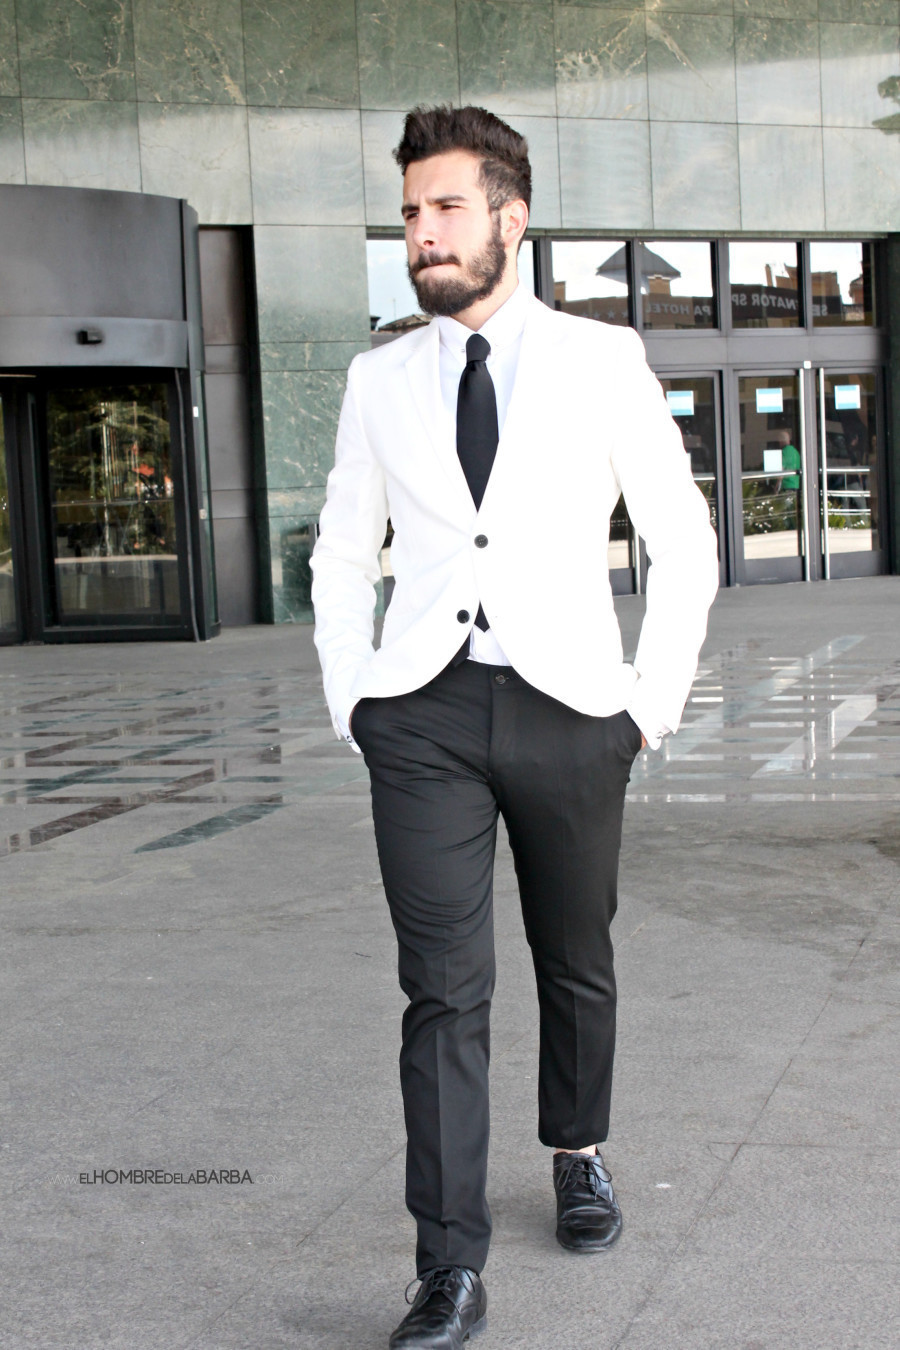 8 of The Best BlazerTrouser Combos  Coolest Hairstyles  Beards For Men  Grooming Tips For Men